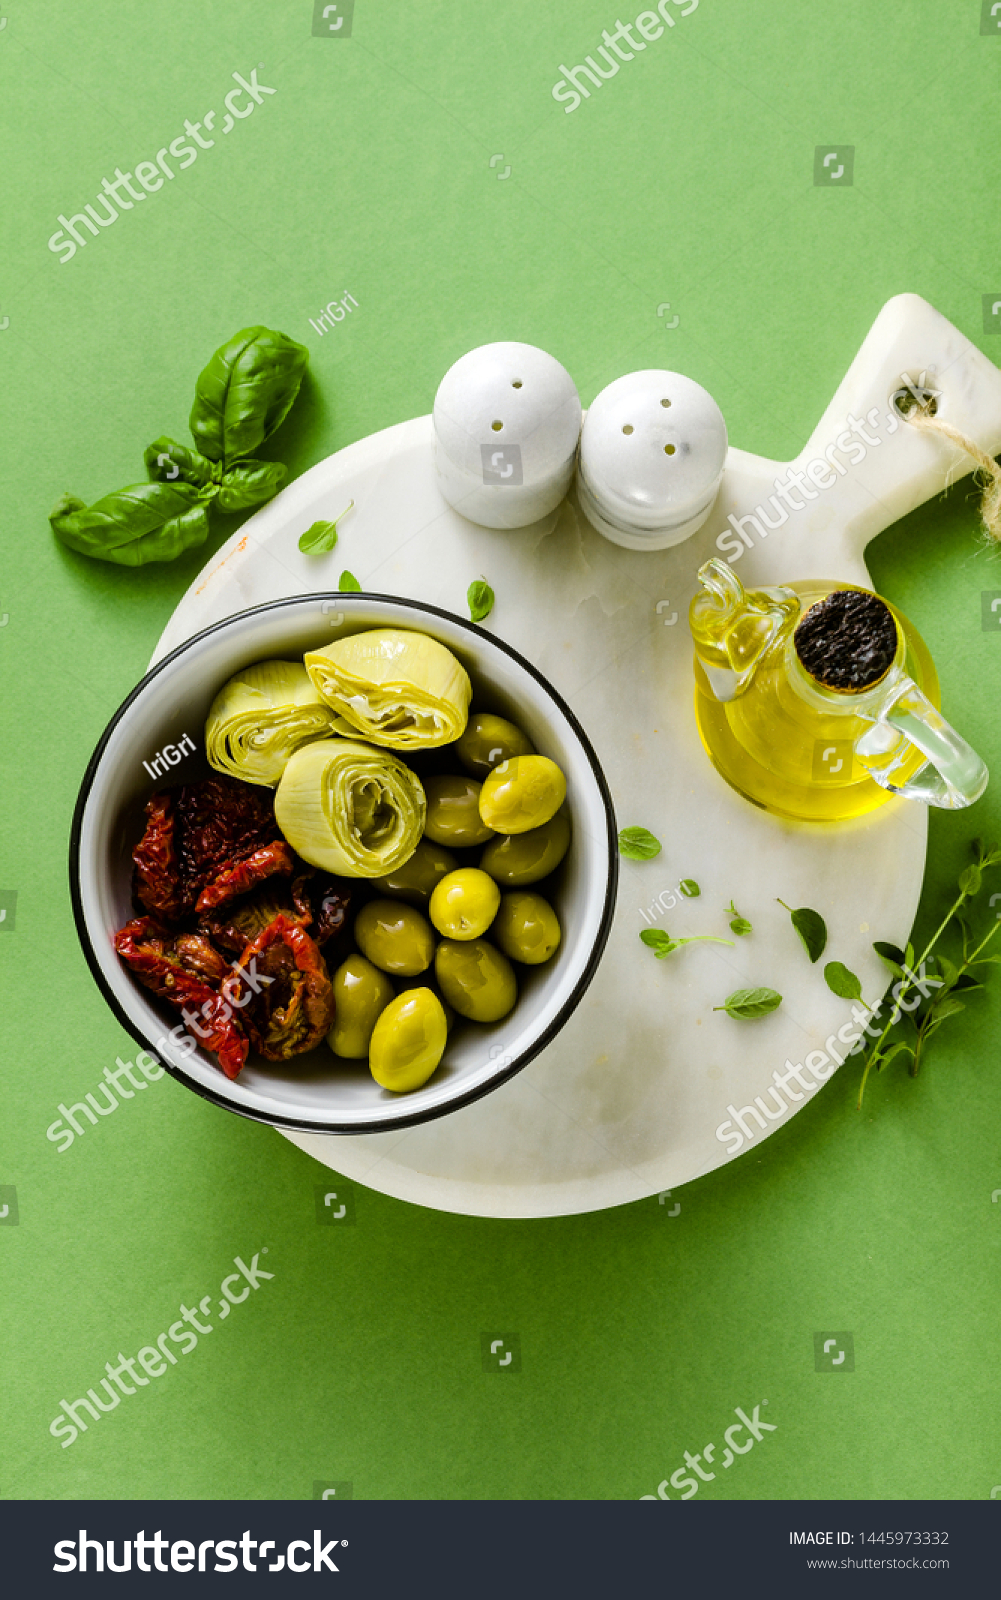 Italian Snacks Cold Appetizers On Table Stock Photo Edit Now 1445973332